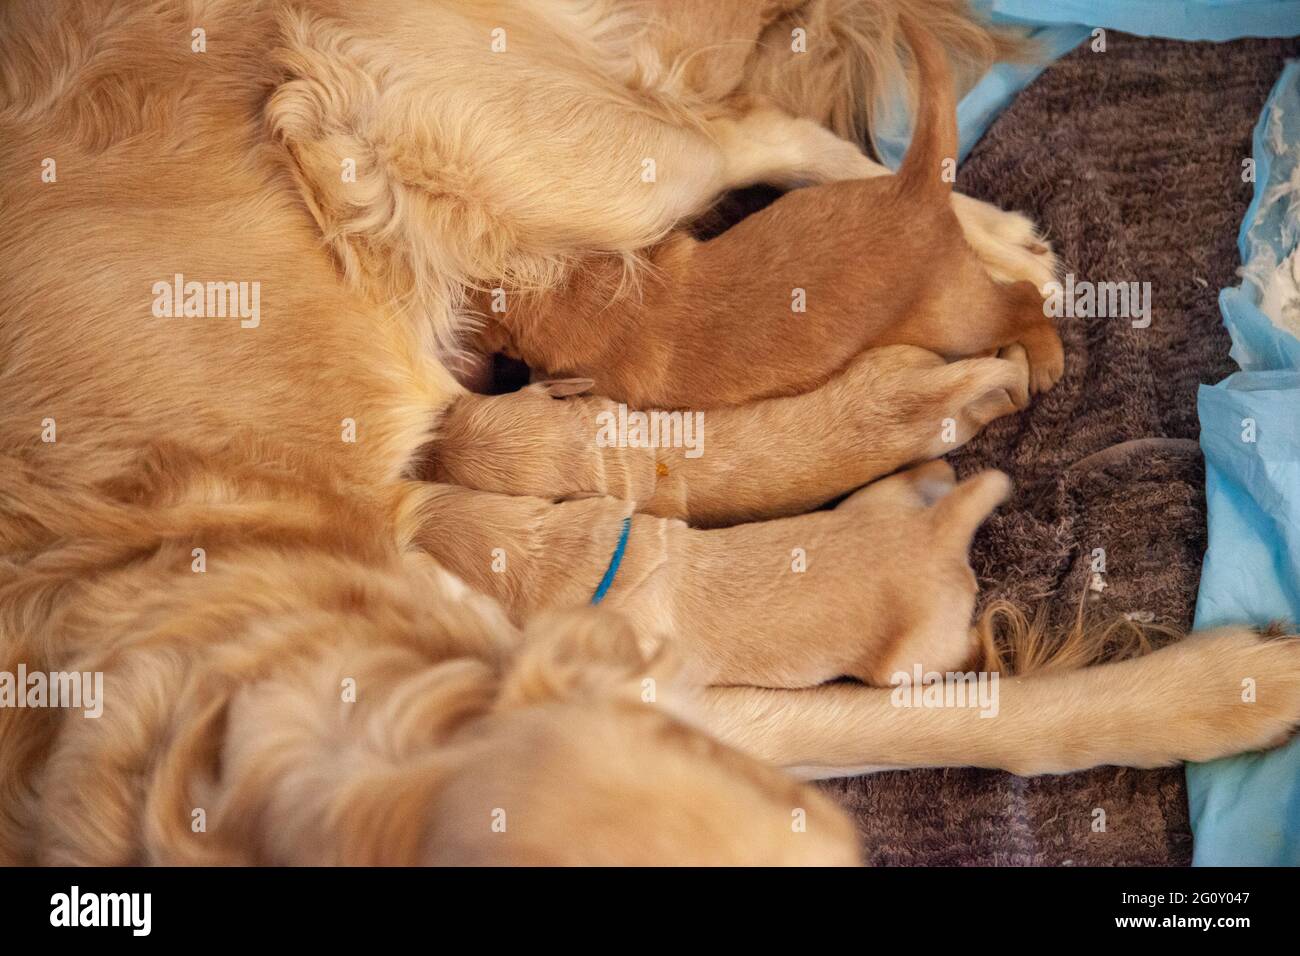 Three little golden puppies nurse on their mother, only a few days old Stock Photo